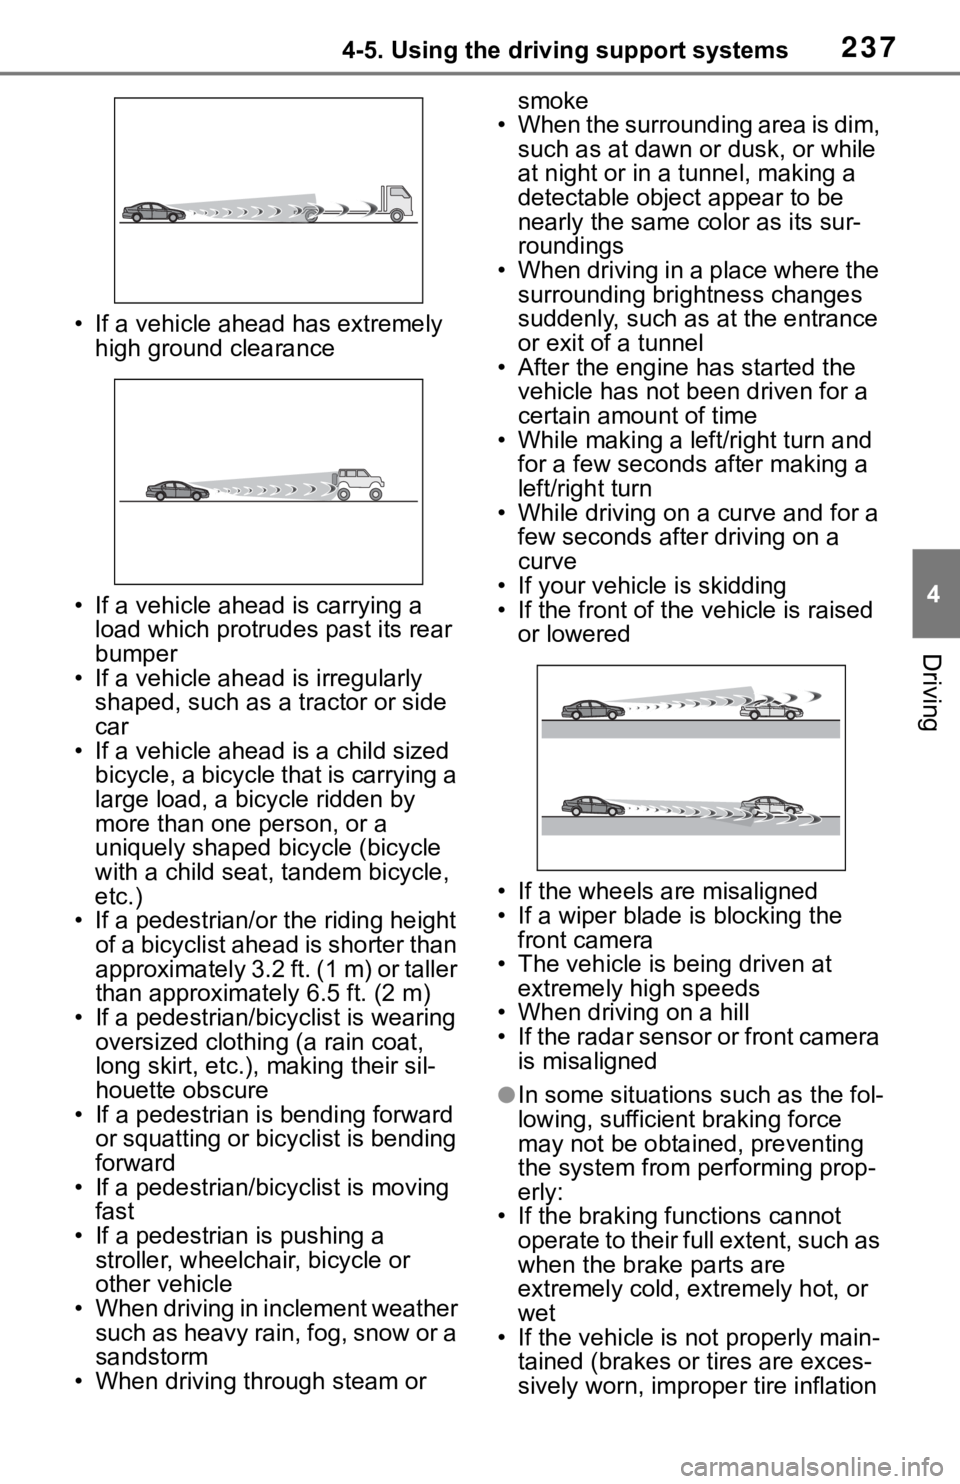 TOYOTA RAV4 2019  Owners Manual (in English) 2374-5. Using the driving support systems
4
Driving
• If a vehicle ahead has extremely high ground clearance
• If a vehicle ahead is carrying a  load which protrudes past its rear 
bumper
• If a